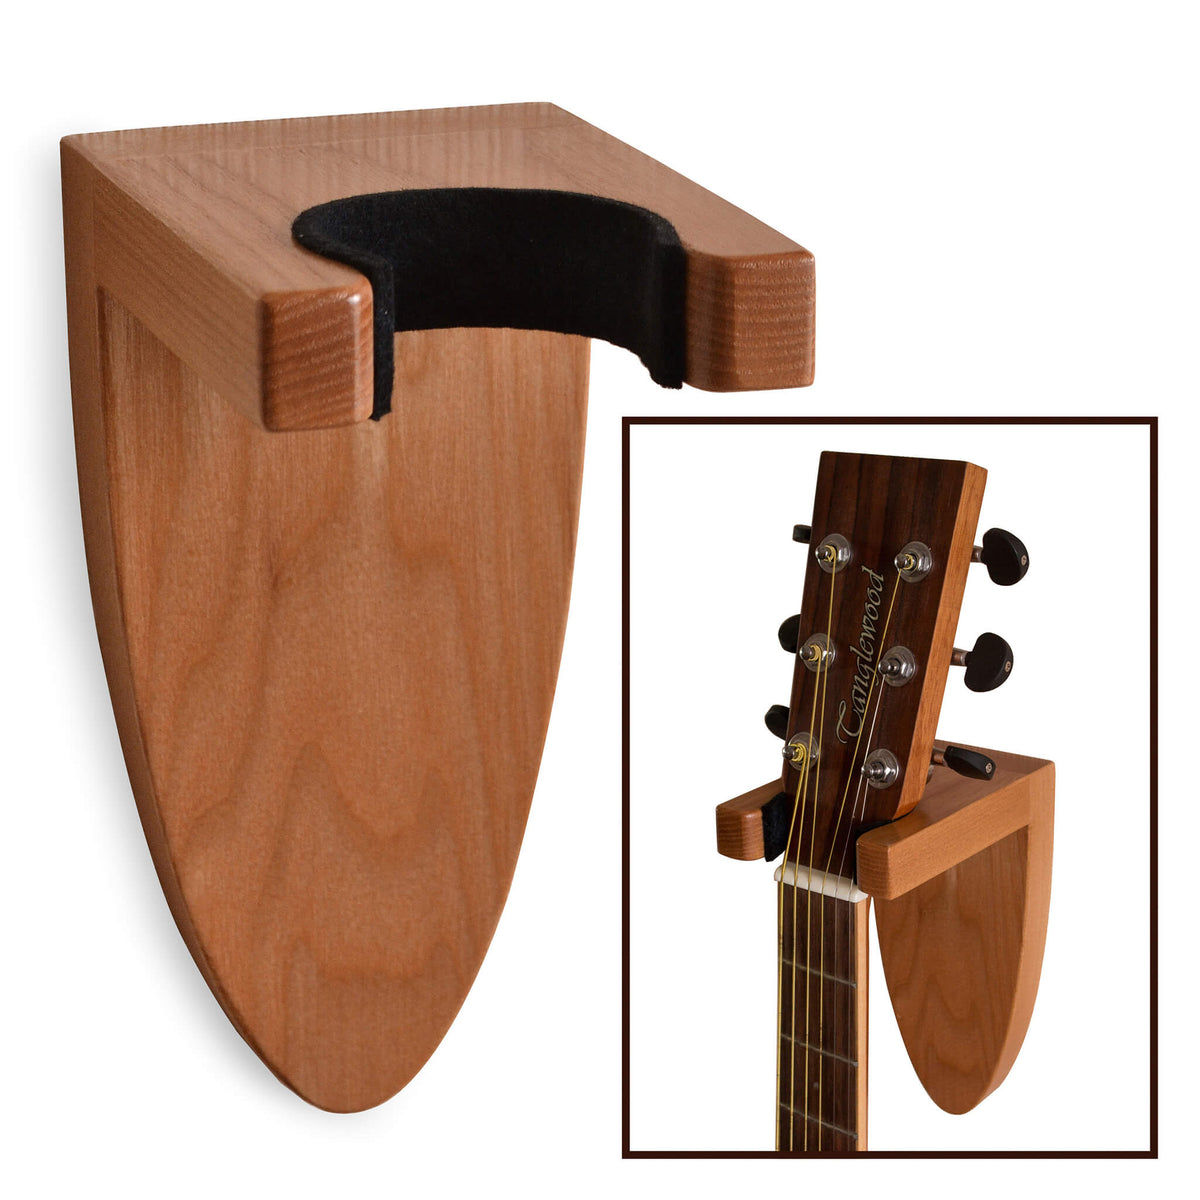 Wooden Guitar Holder for Wall